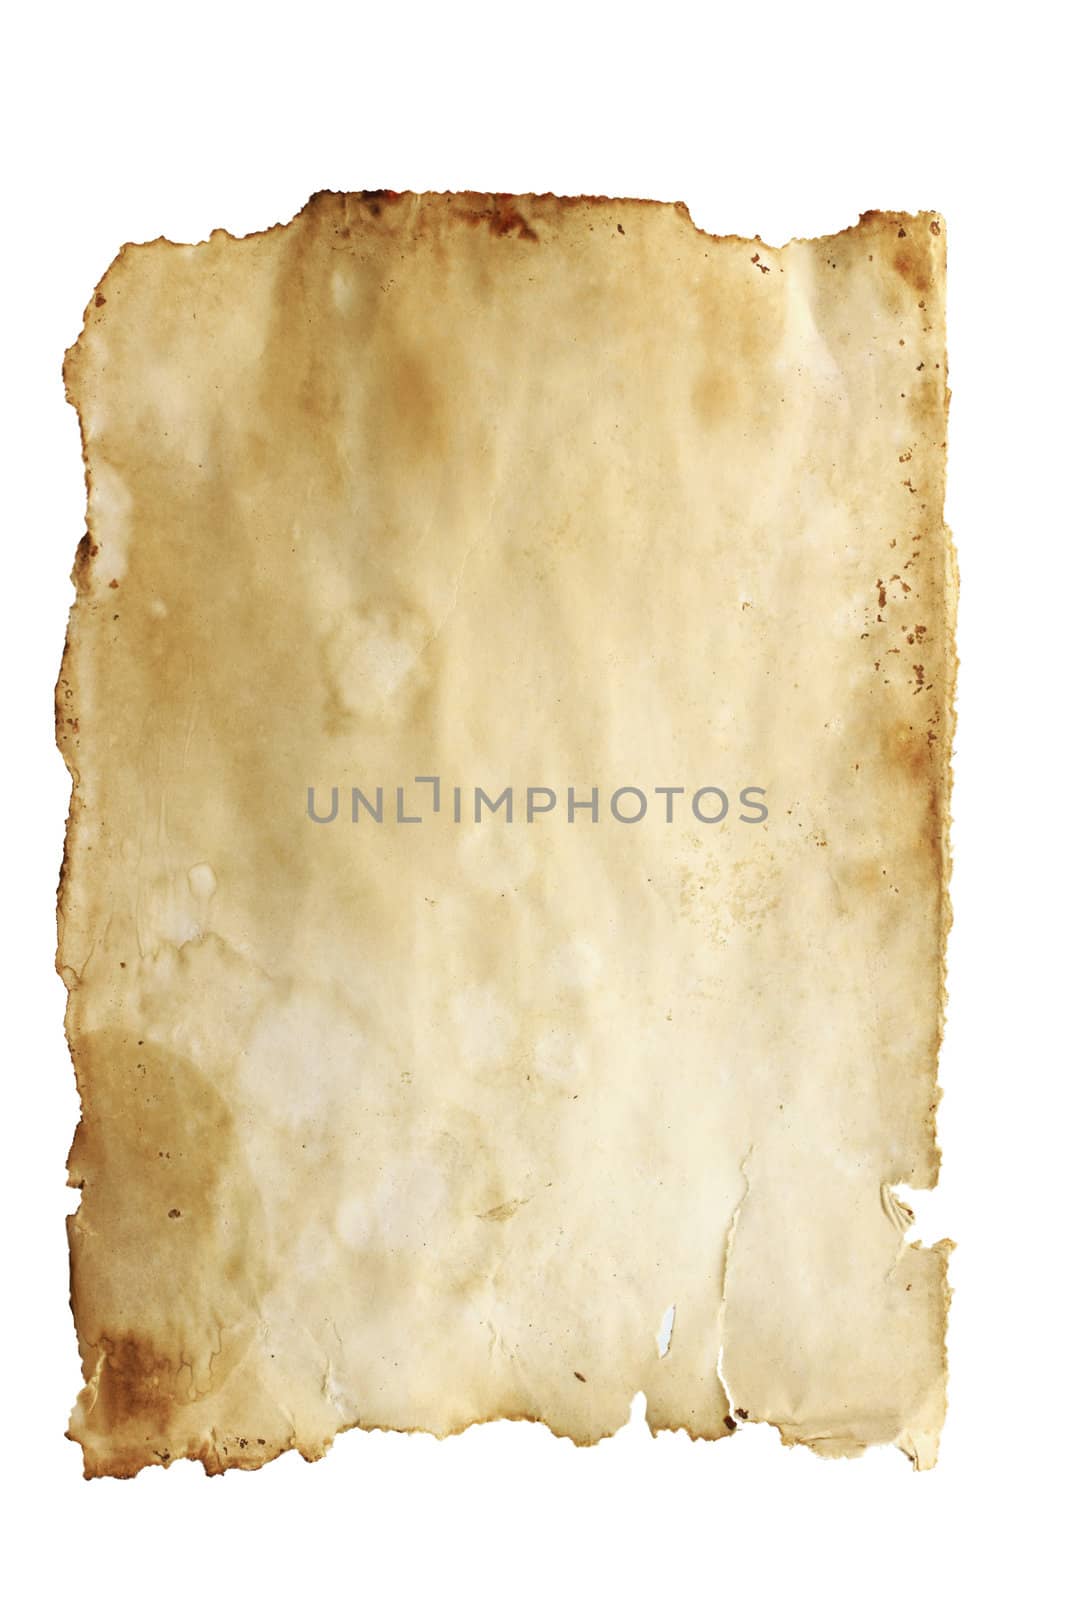 Stained old paper with rough edges isolated on a white background.
